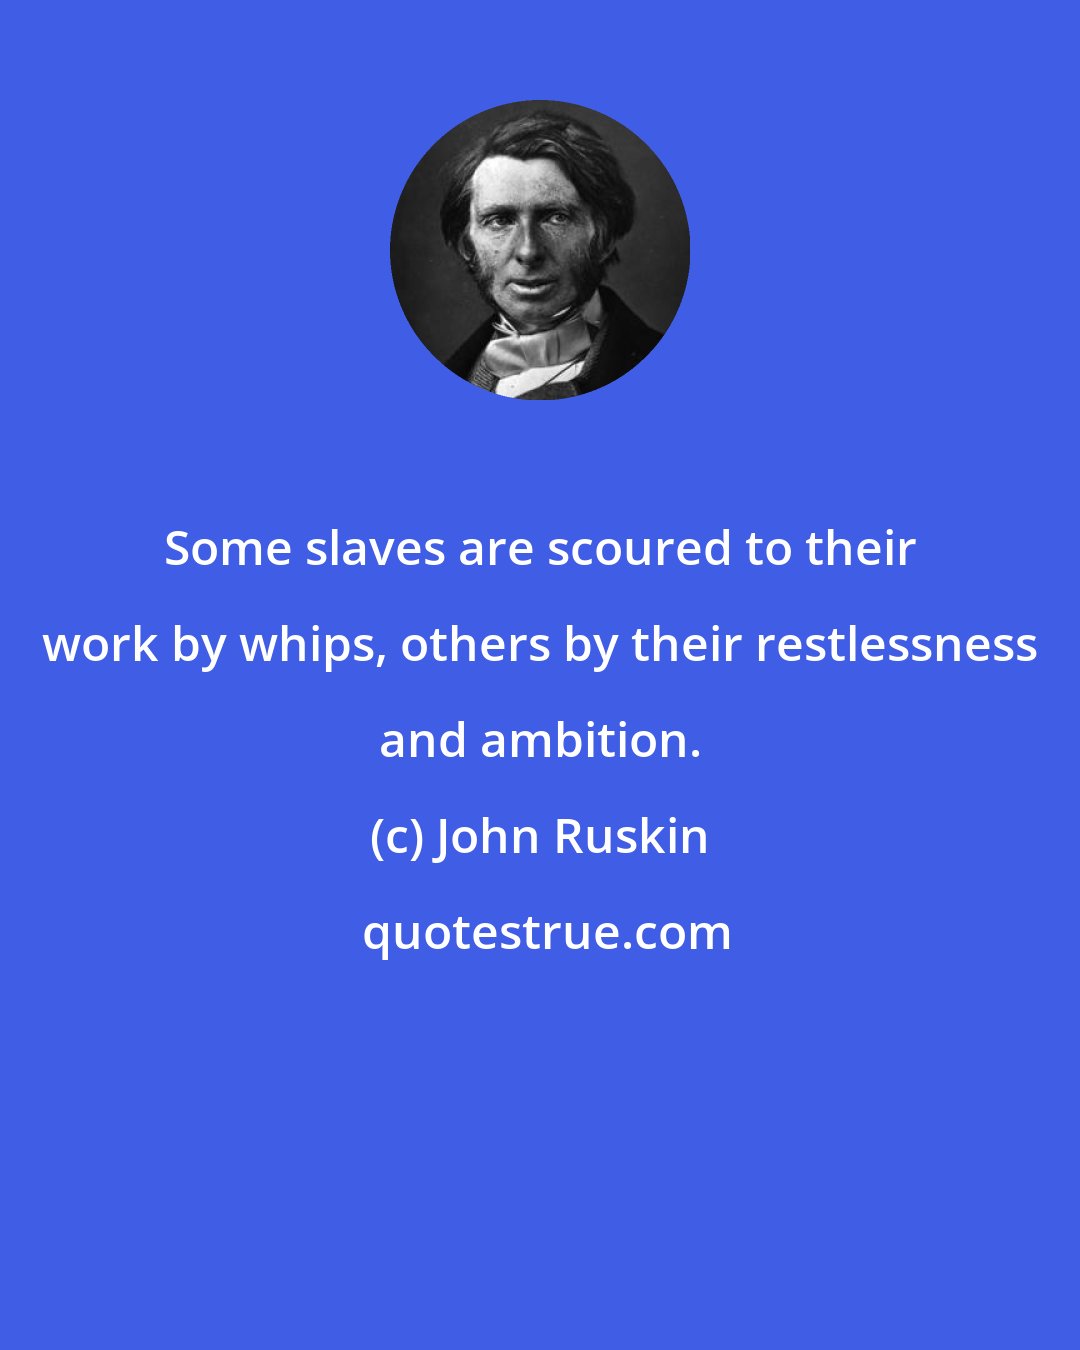 John Ruskin: Some slaves are scoured to their work by whips, others by their restlessness and ambition.